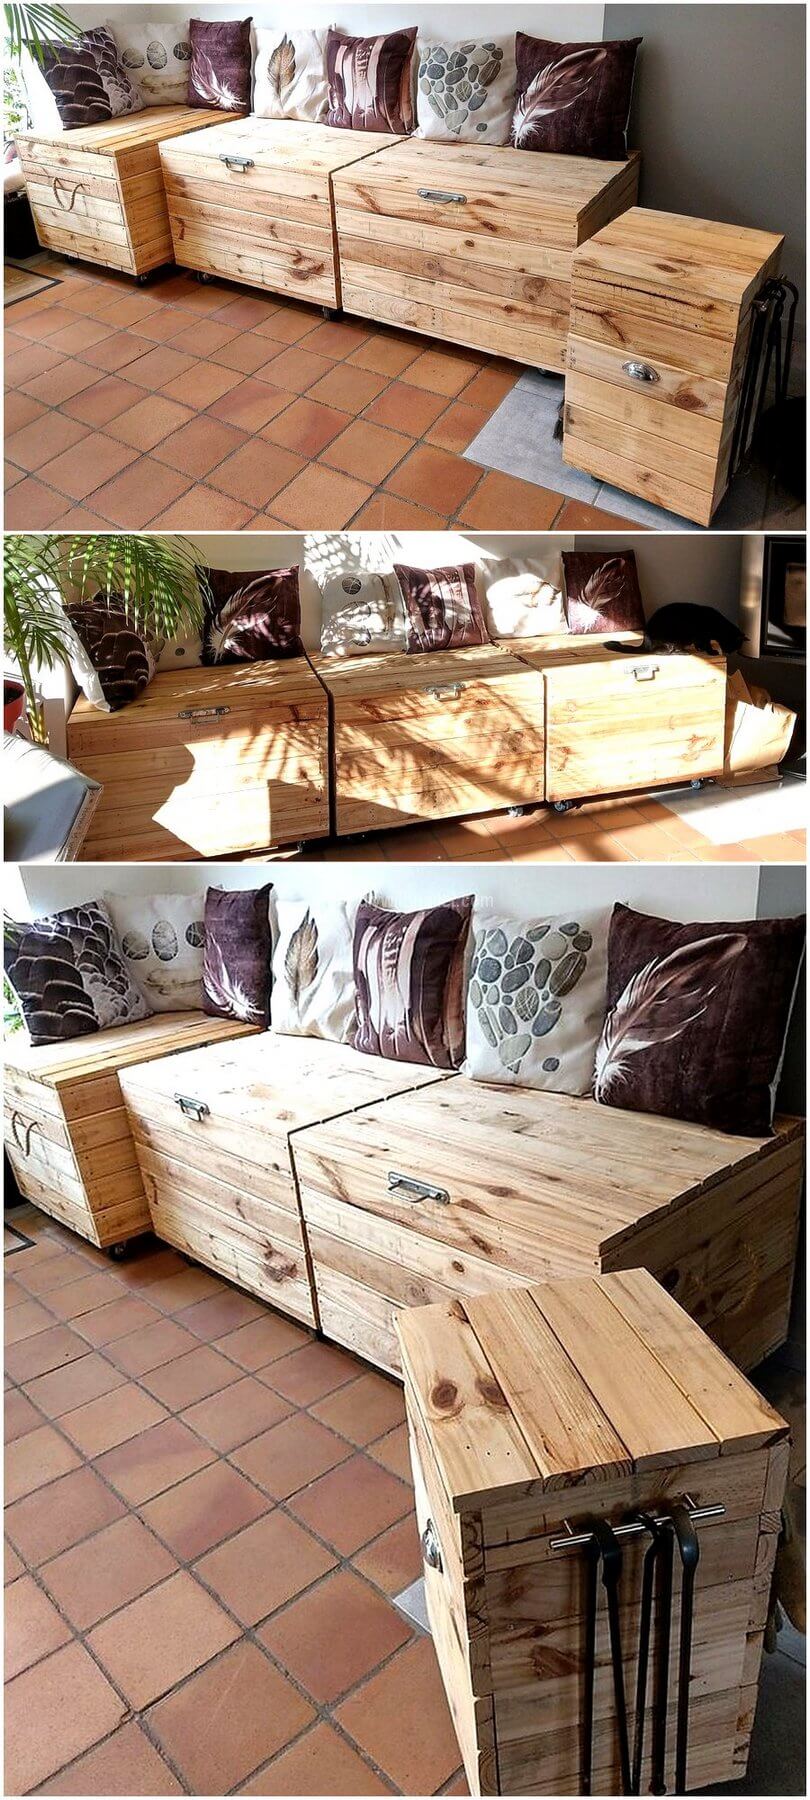 pallet seating and storage